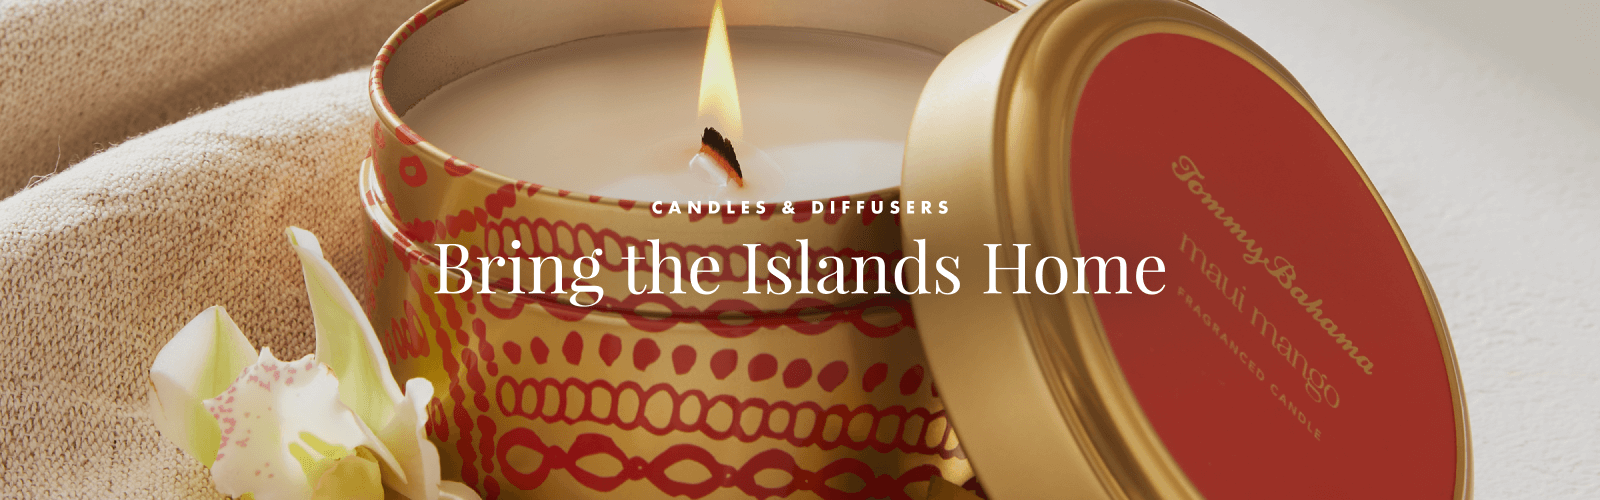 Candles & Diffusers - Bring the Islands Home